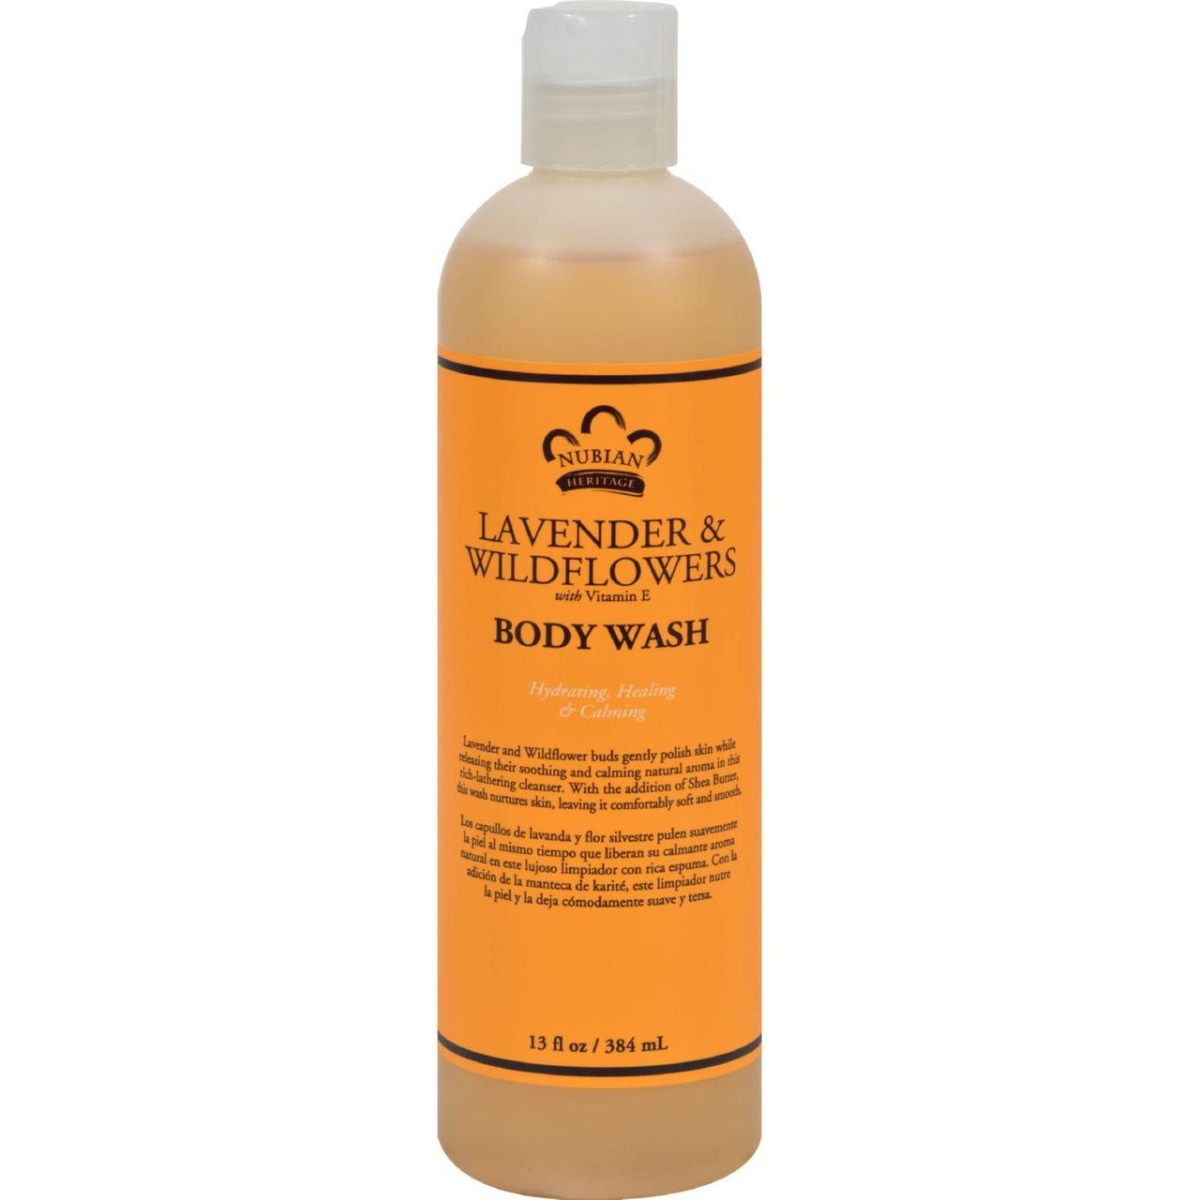 Hg0918219 13 Fl Oz Body Wash With Shea Butter Lavender & Wildflowers